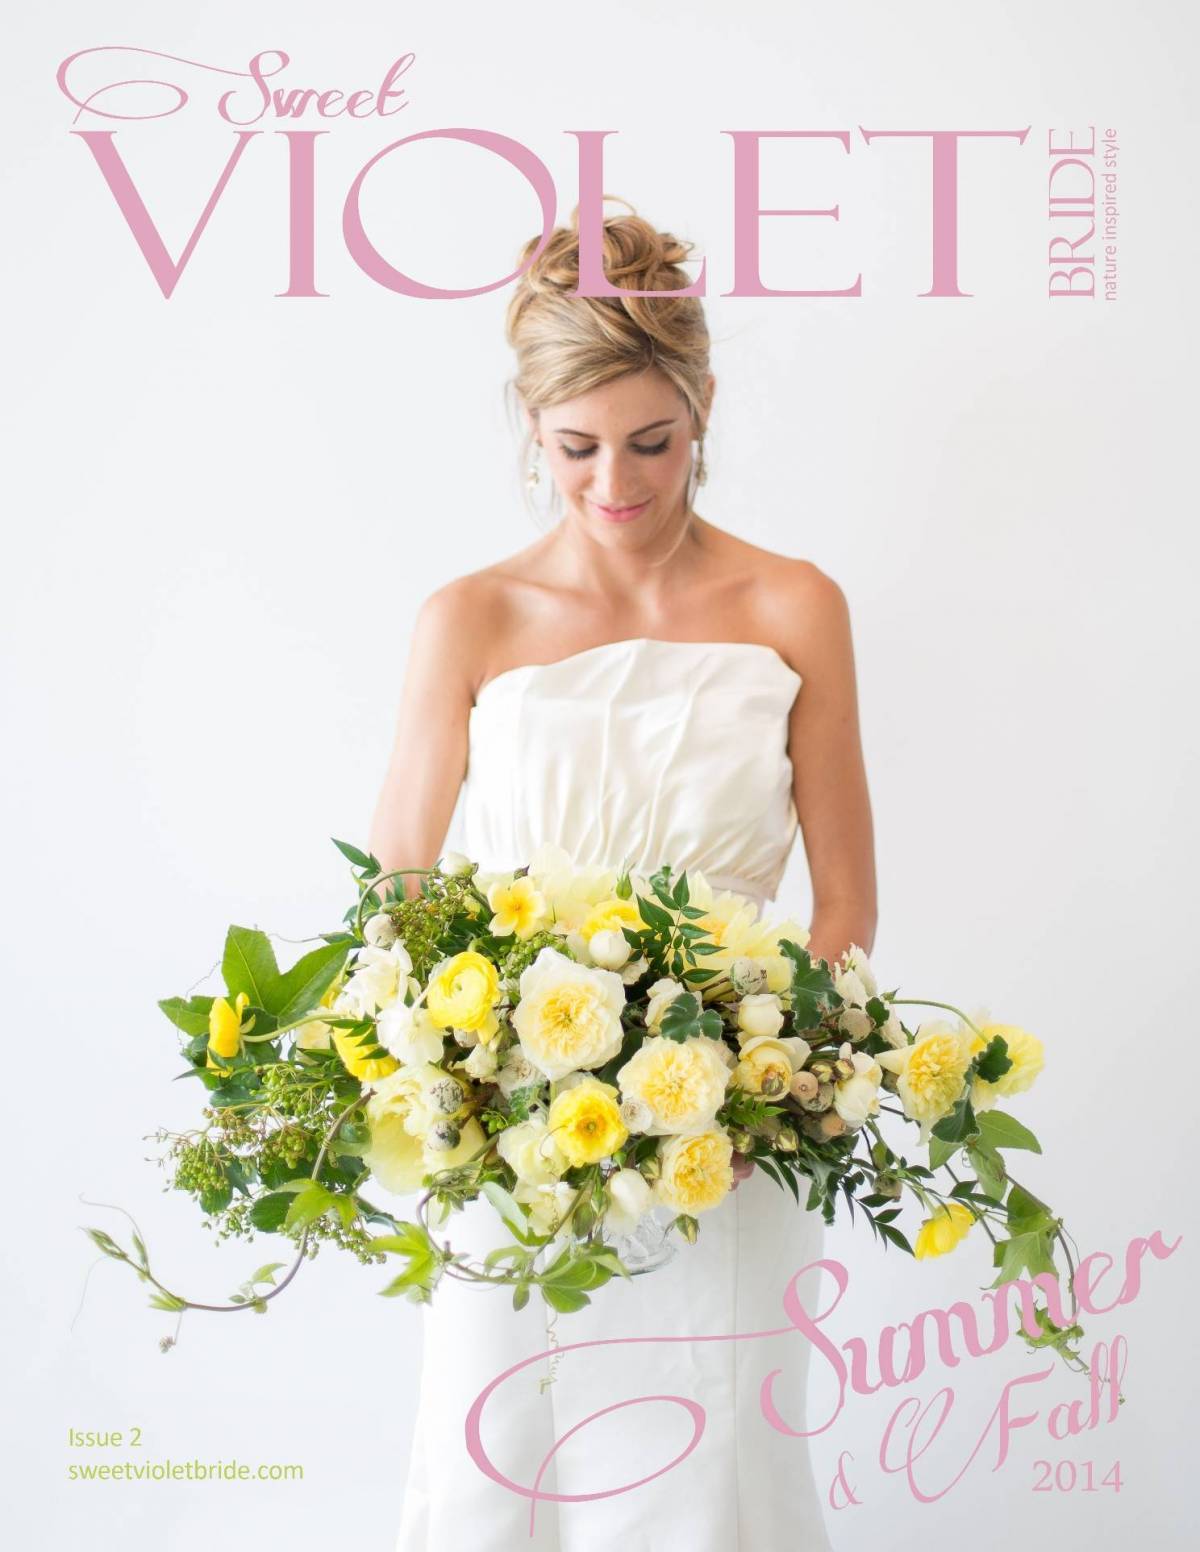 Sweet Violet Bride Magazine – Issue 2 is Now Available!